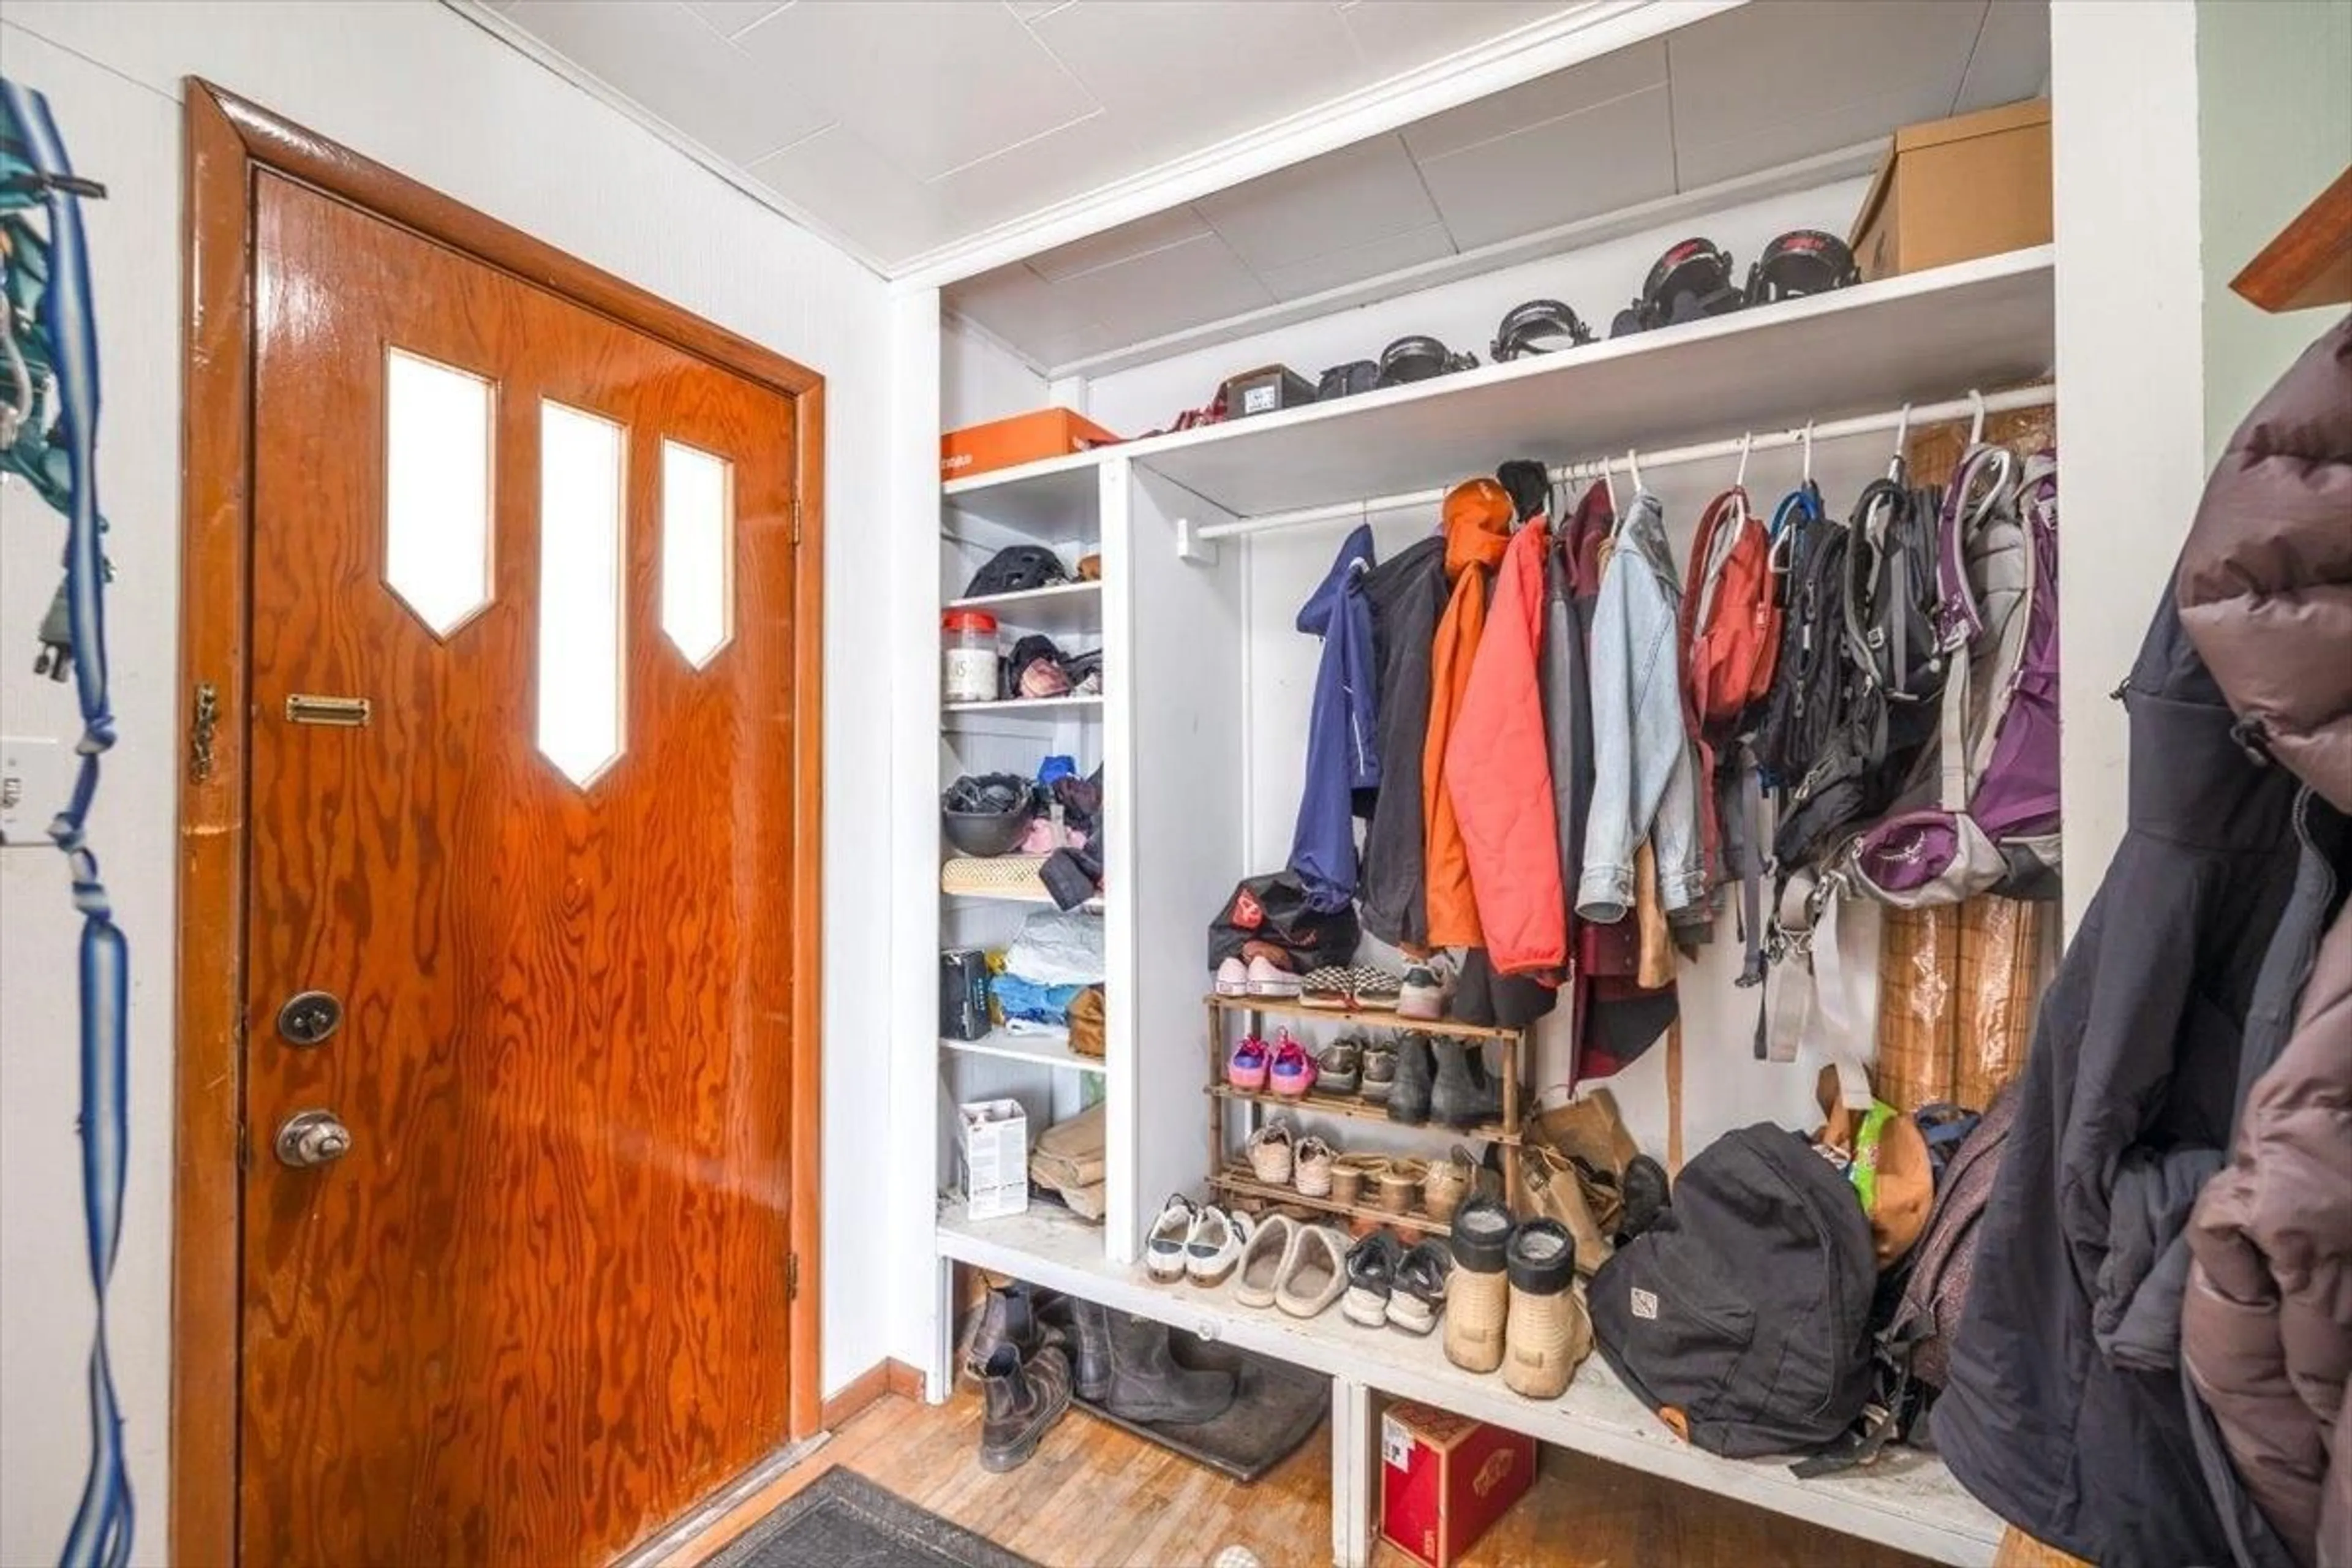 Storage room or clothes room or walk-in closet for 741 5TH AVENUE, Fernie British Columbia V0B1M0